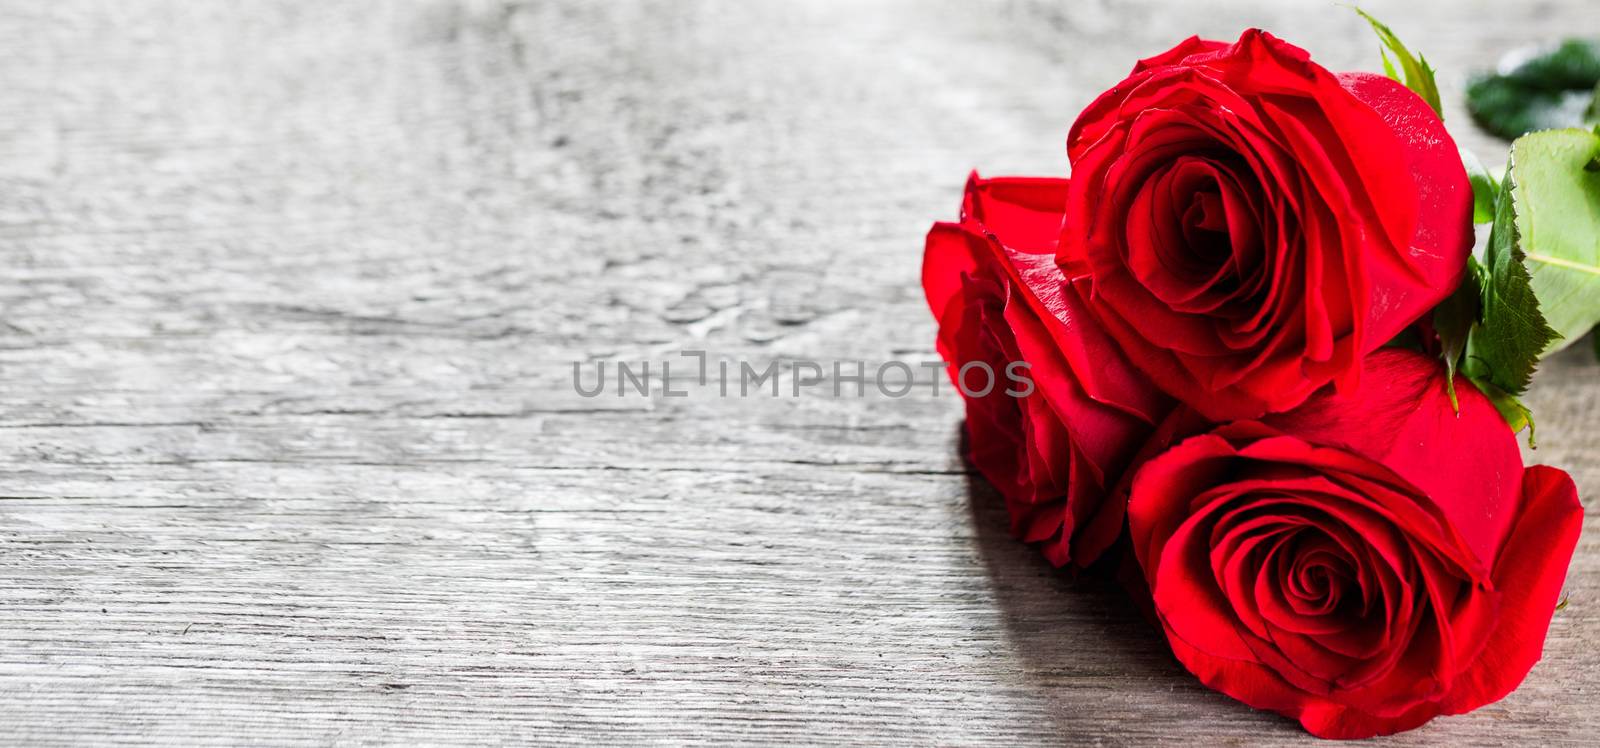 Three beautiful red roses on aged wooden background